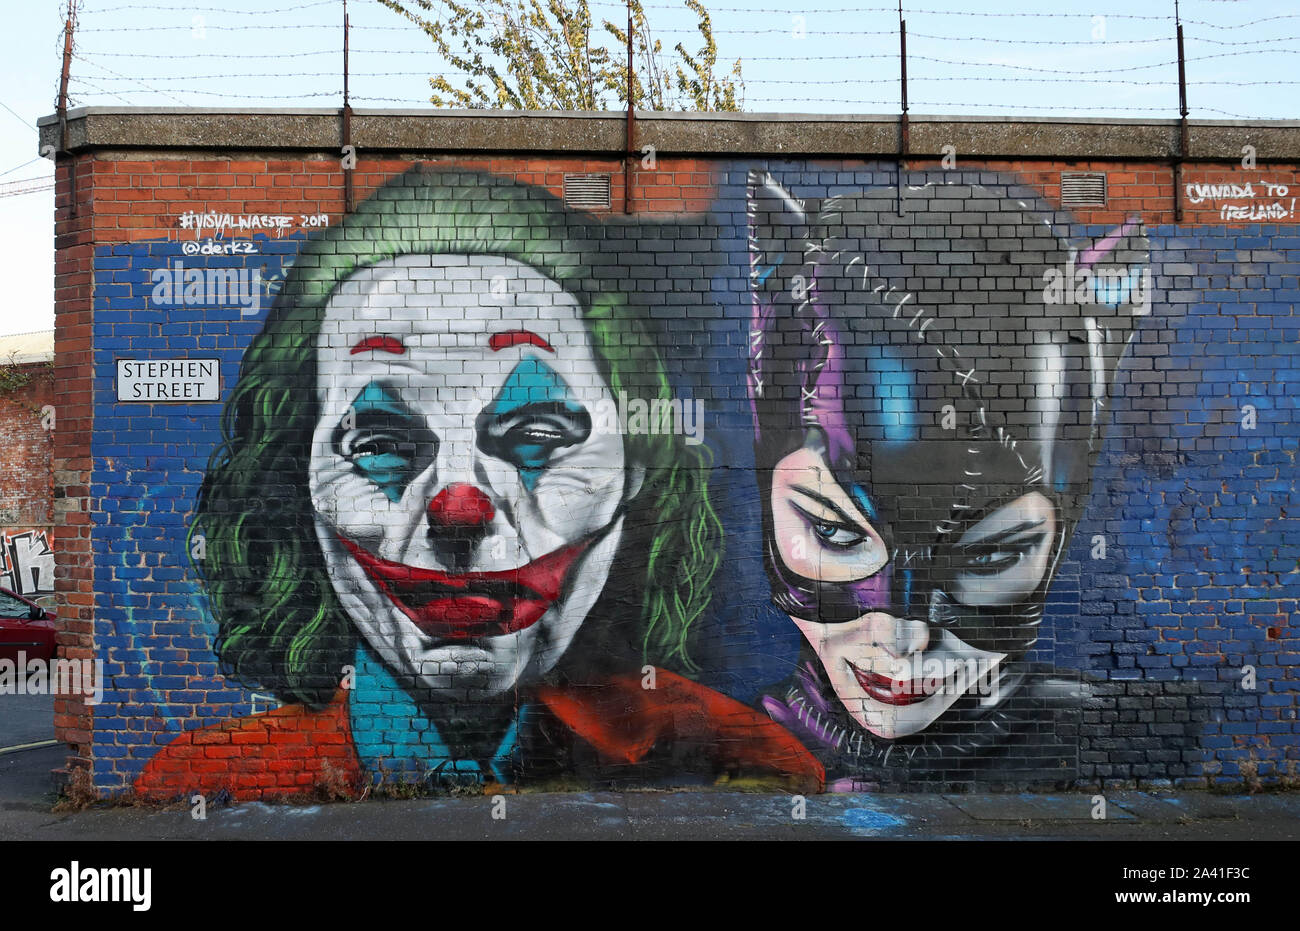 Belfast graffiti and mural art company, Visual Waste, have produced a tribute to the new Joker film, on Stephen Street, Belfast. Stock Photo